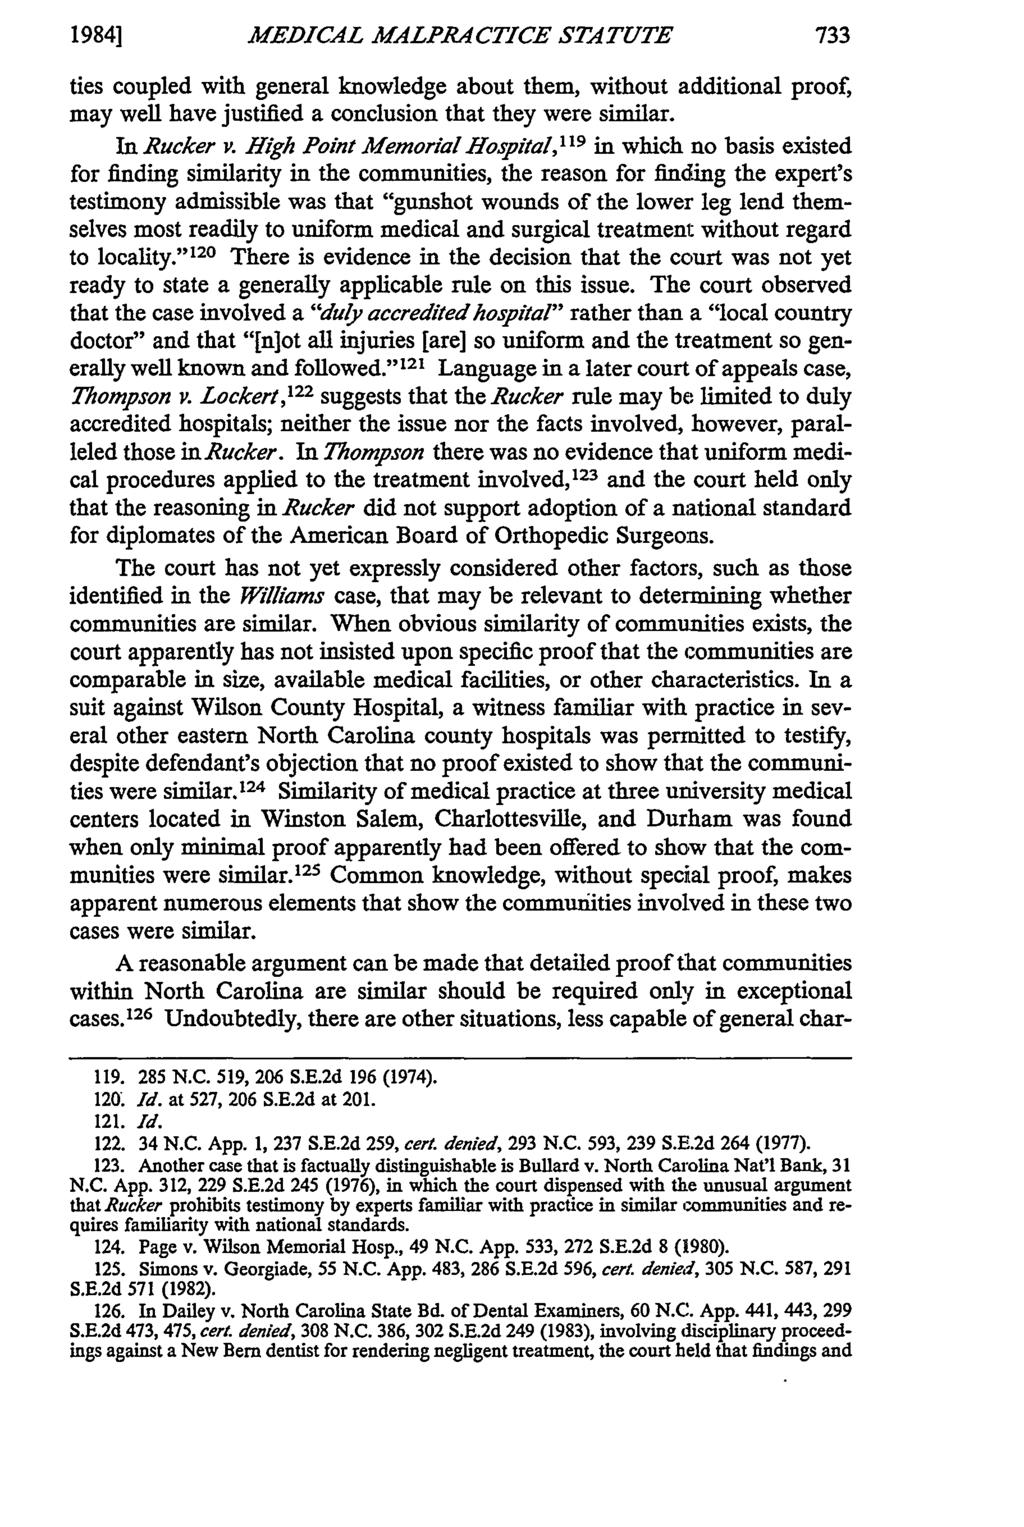 19841 MEDICAL MALPR CTICE STA TUTE ties coupled with general knowledge about them, without additional proof, may well have justified a conclusion that they were similar. In Rucker v.